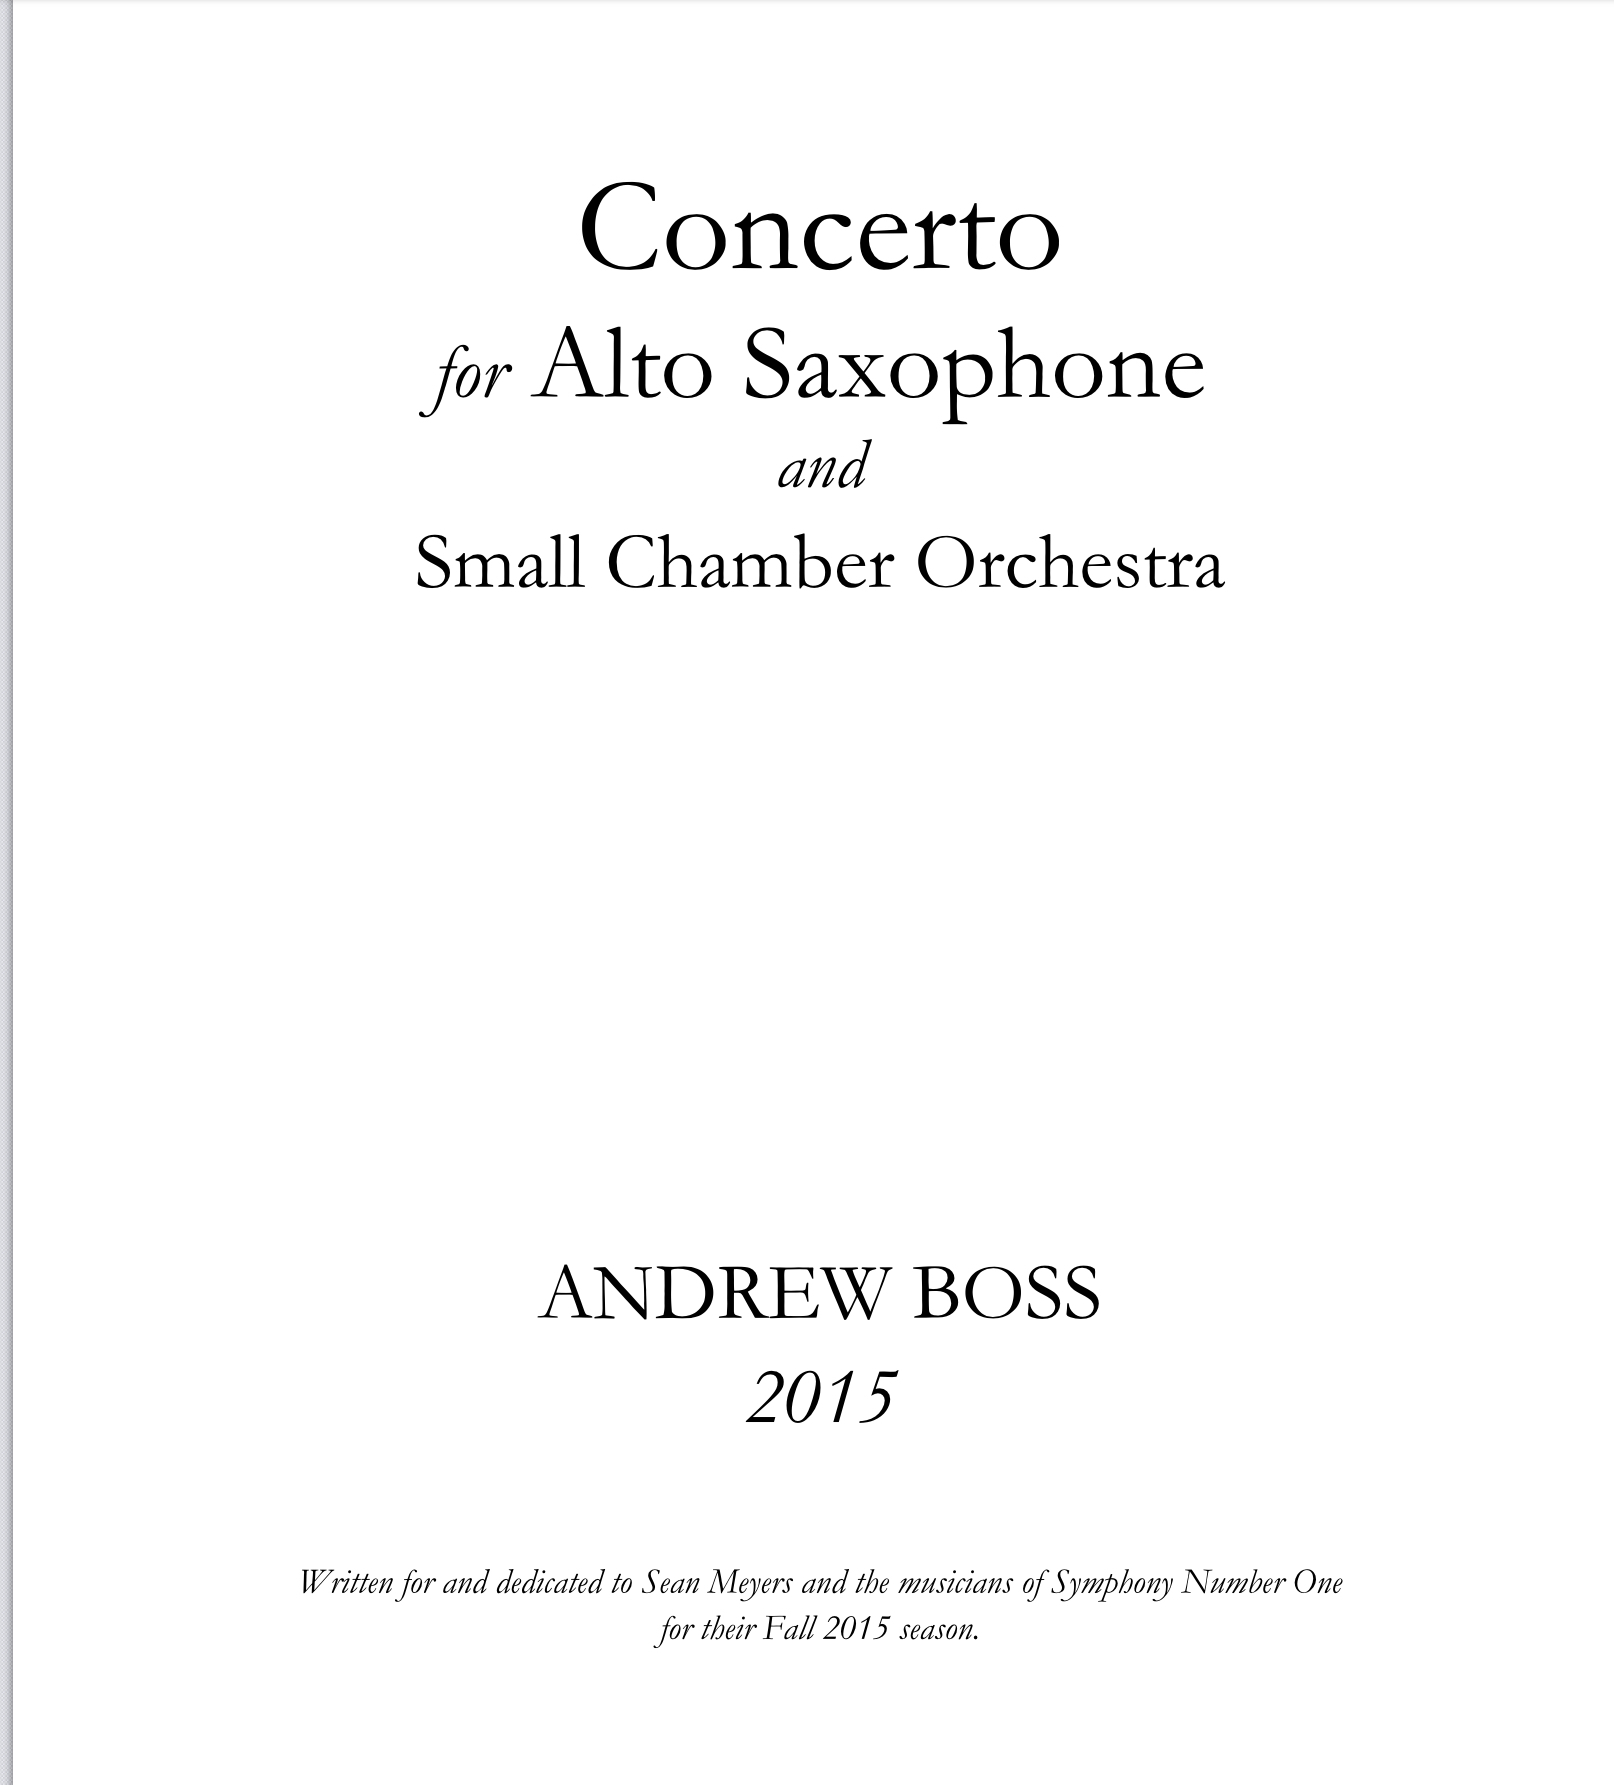 Concerto For Alto Saxophone-Piano Reduction  by Andrew Boss